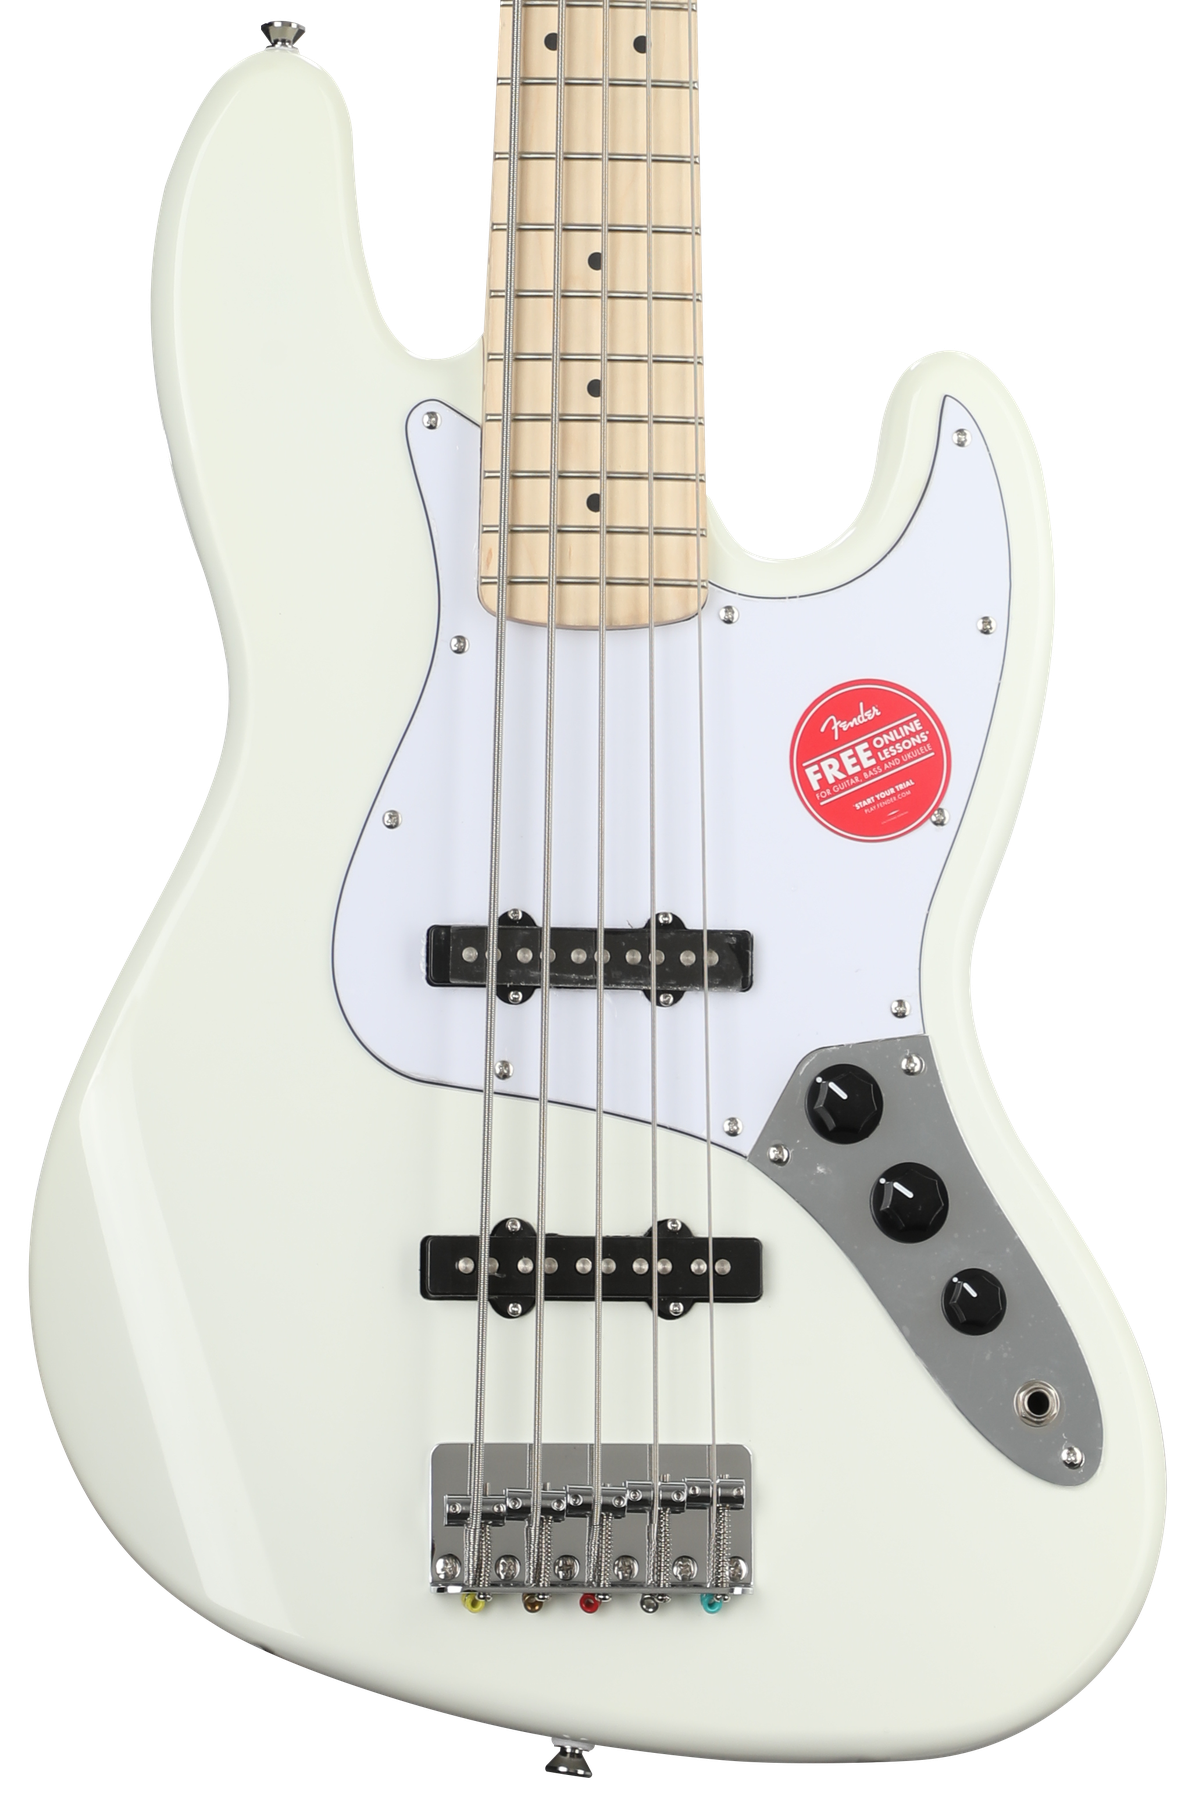 Bundled Item: Squier Affinity Series Jazz Bass V - Olympic White with Maple Fingerboard